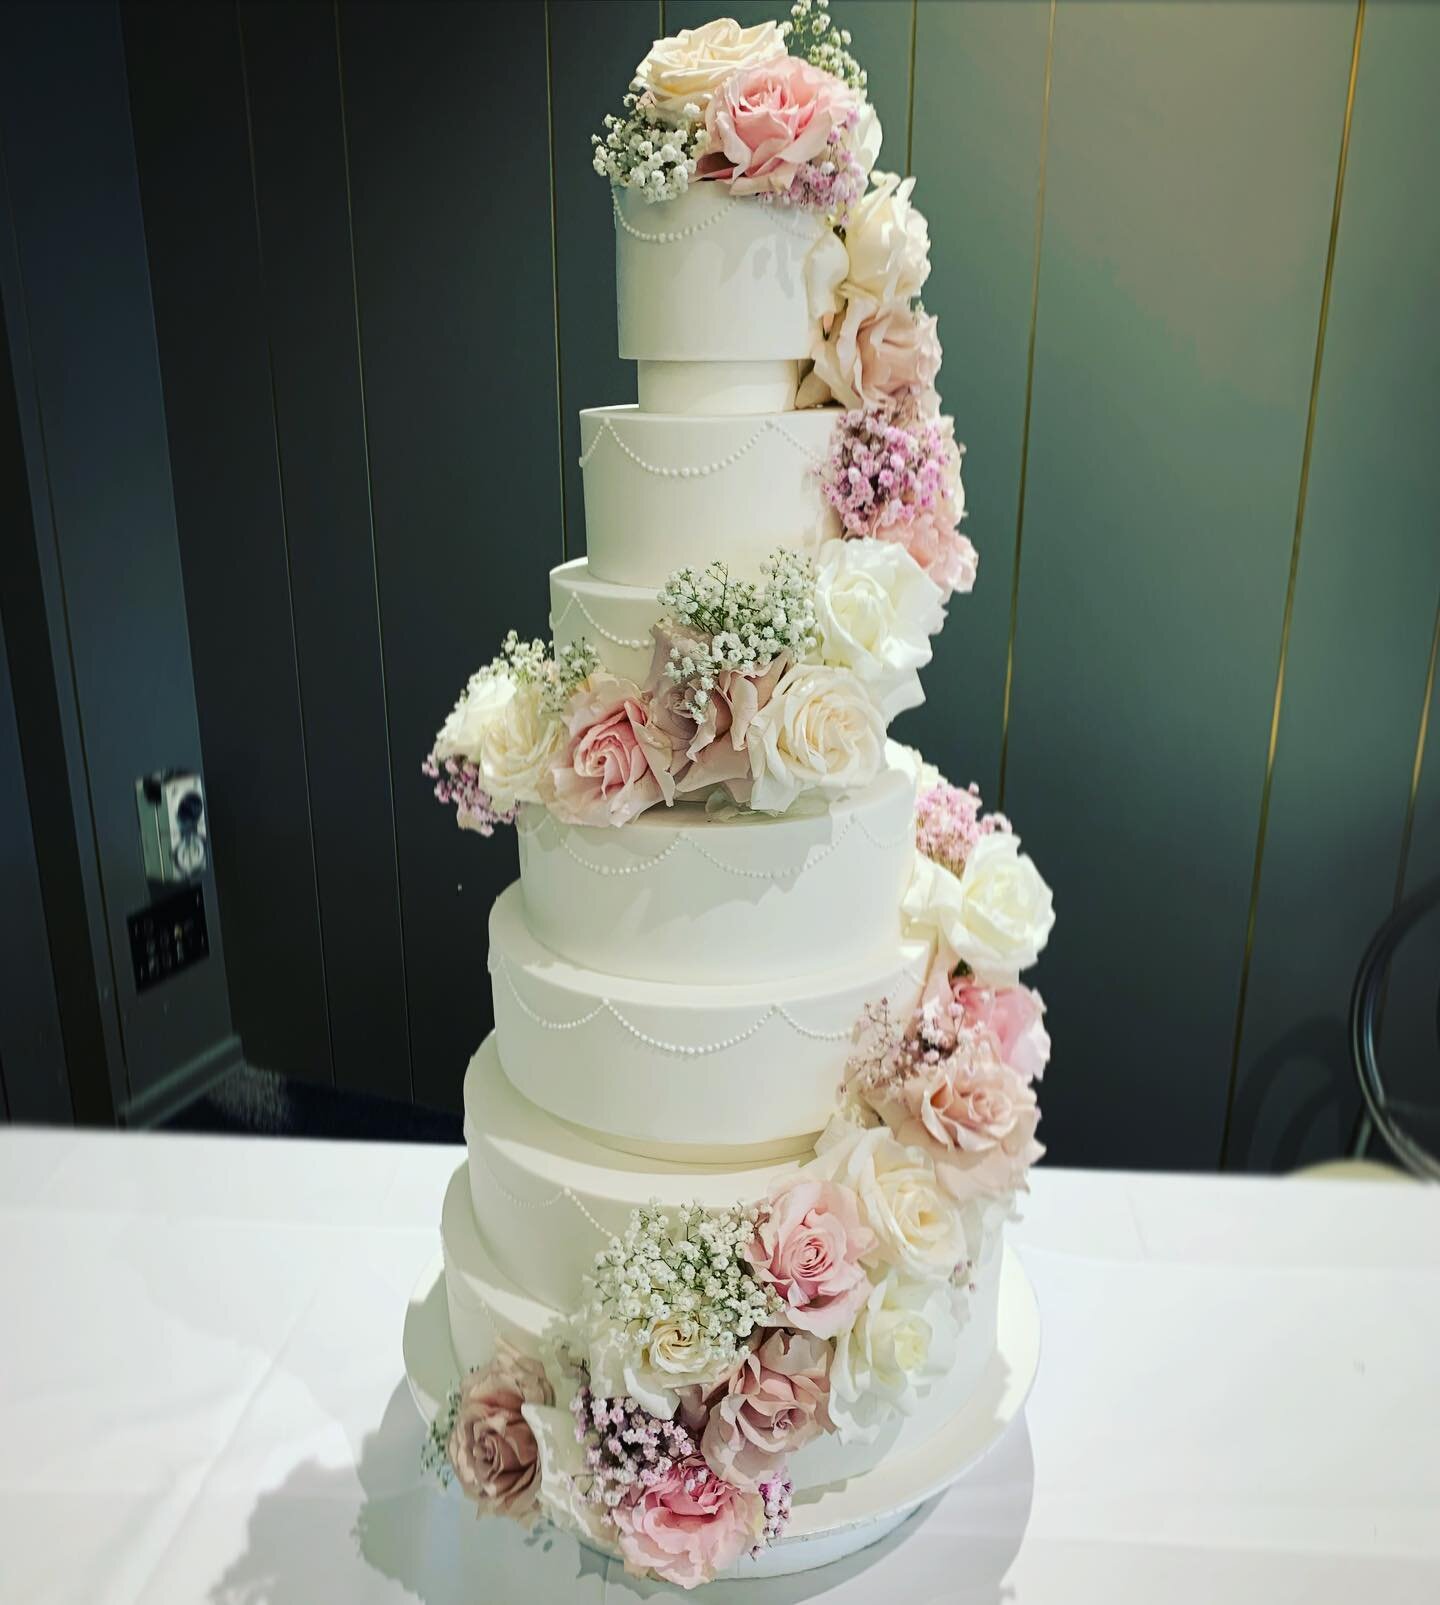 Spring vibes with fresh flowers wrapping around this elegant hand piped cake